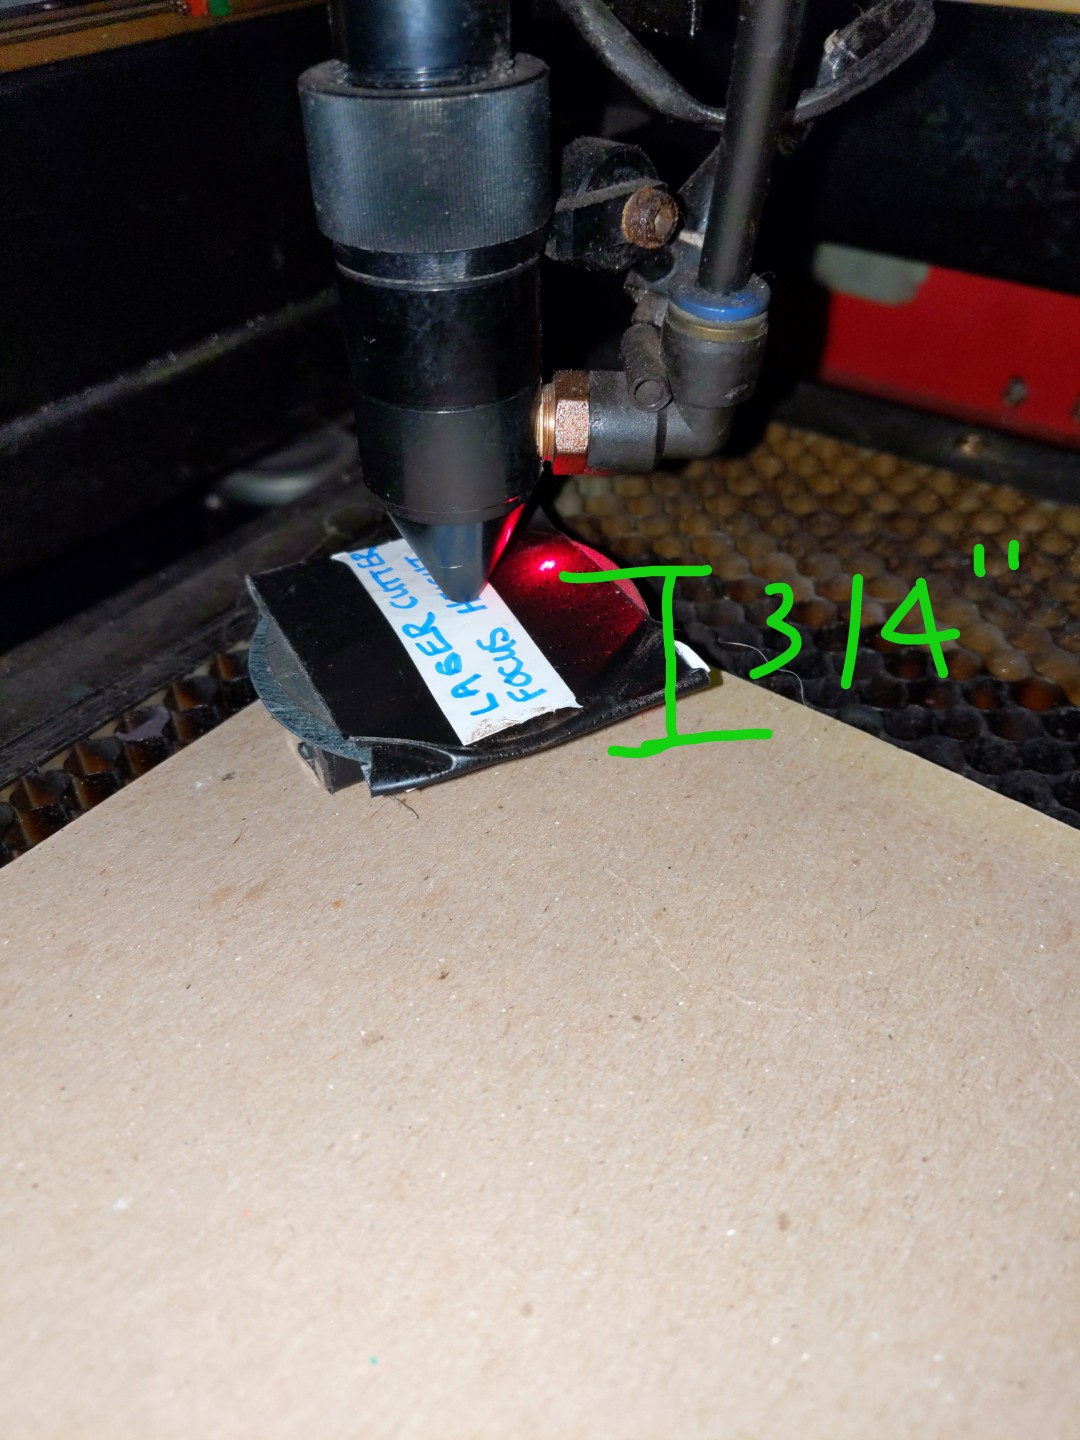 Laser bed correct bed height with tool.jpg